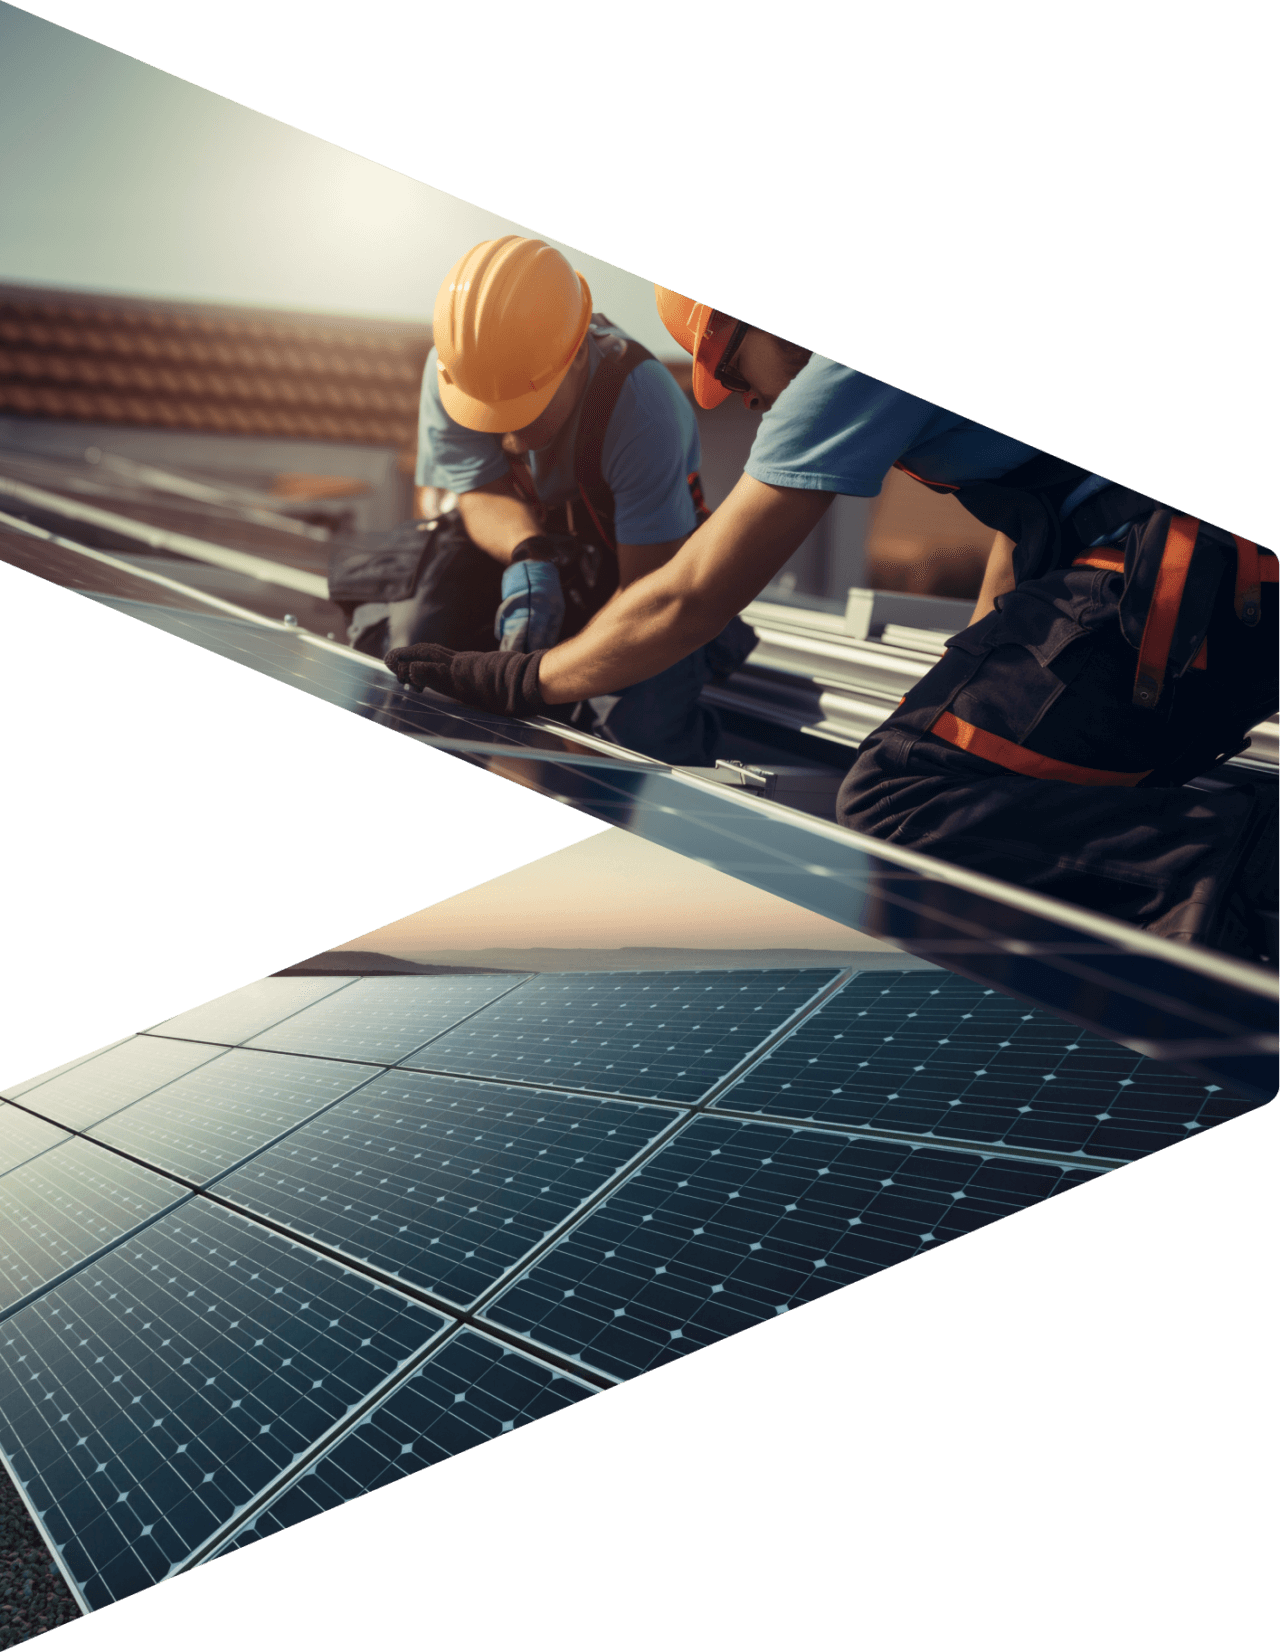 A graphic image of workers installing solar panels in an arrow shape